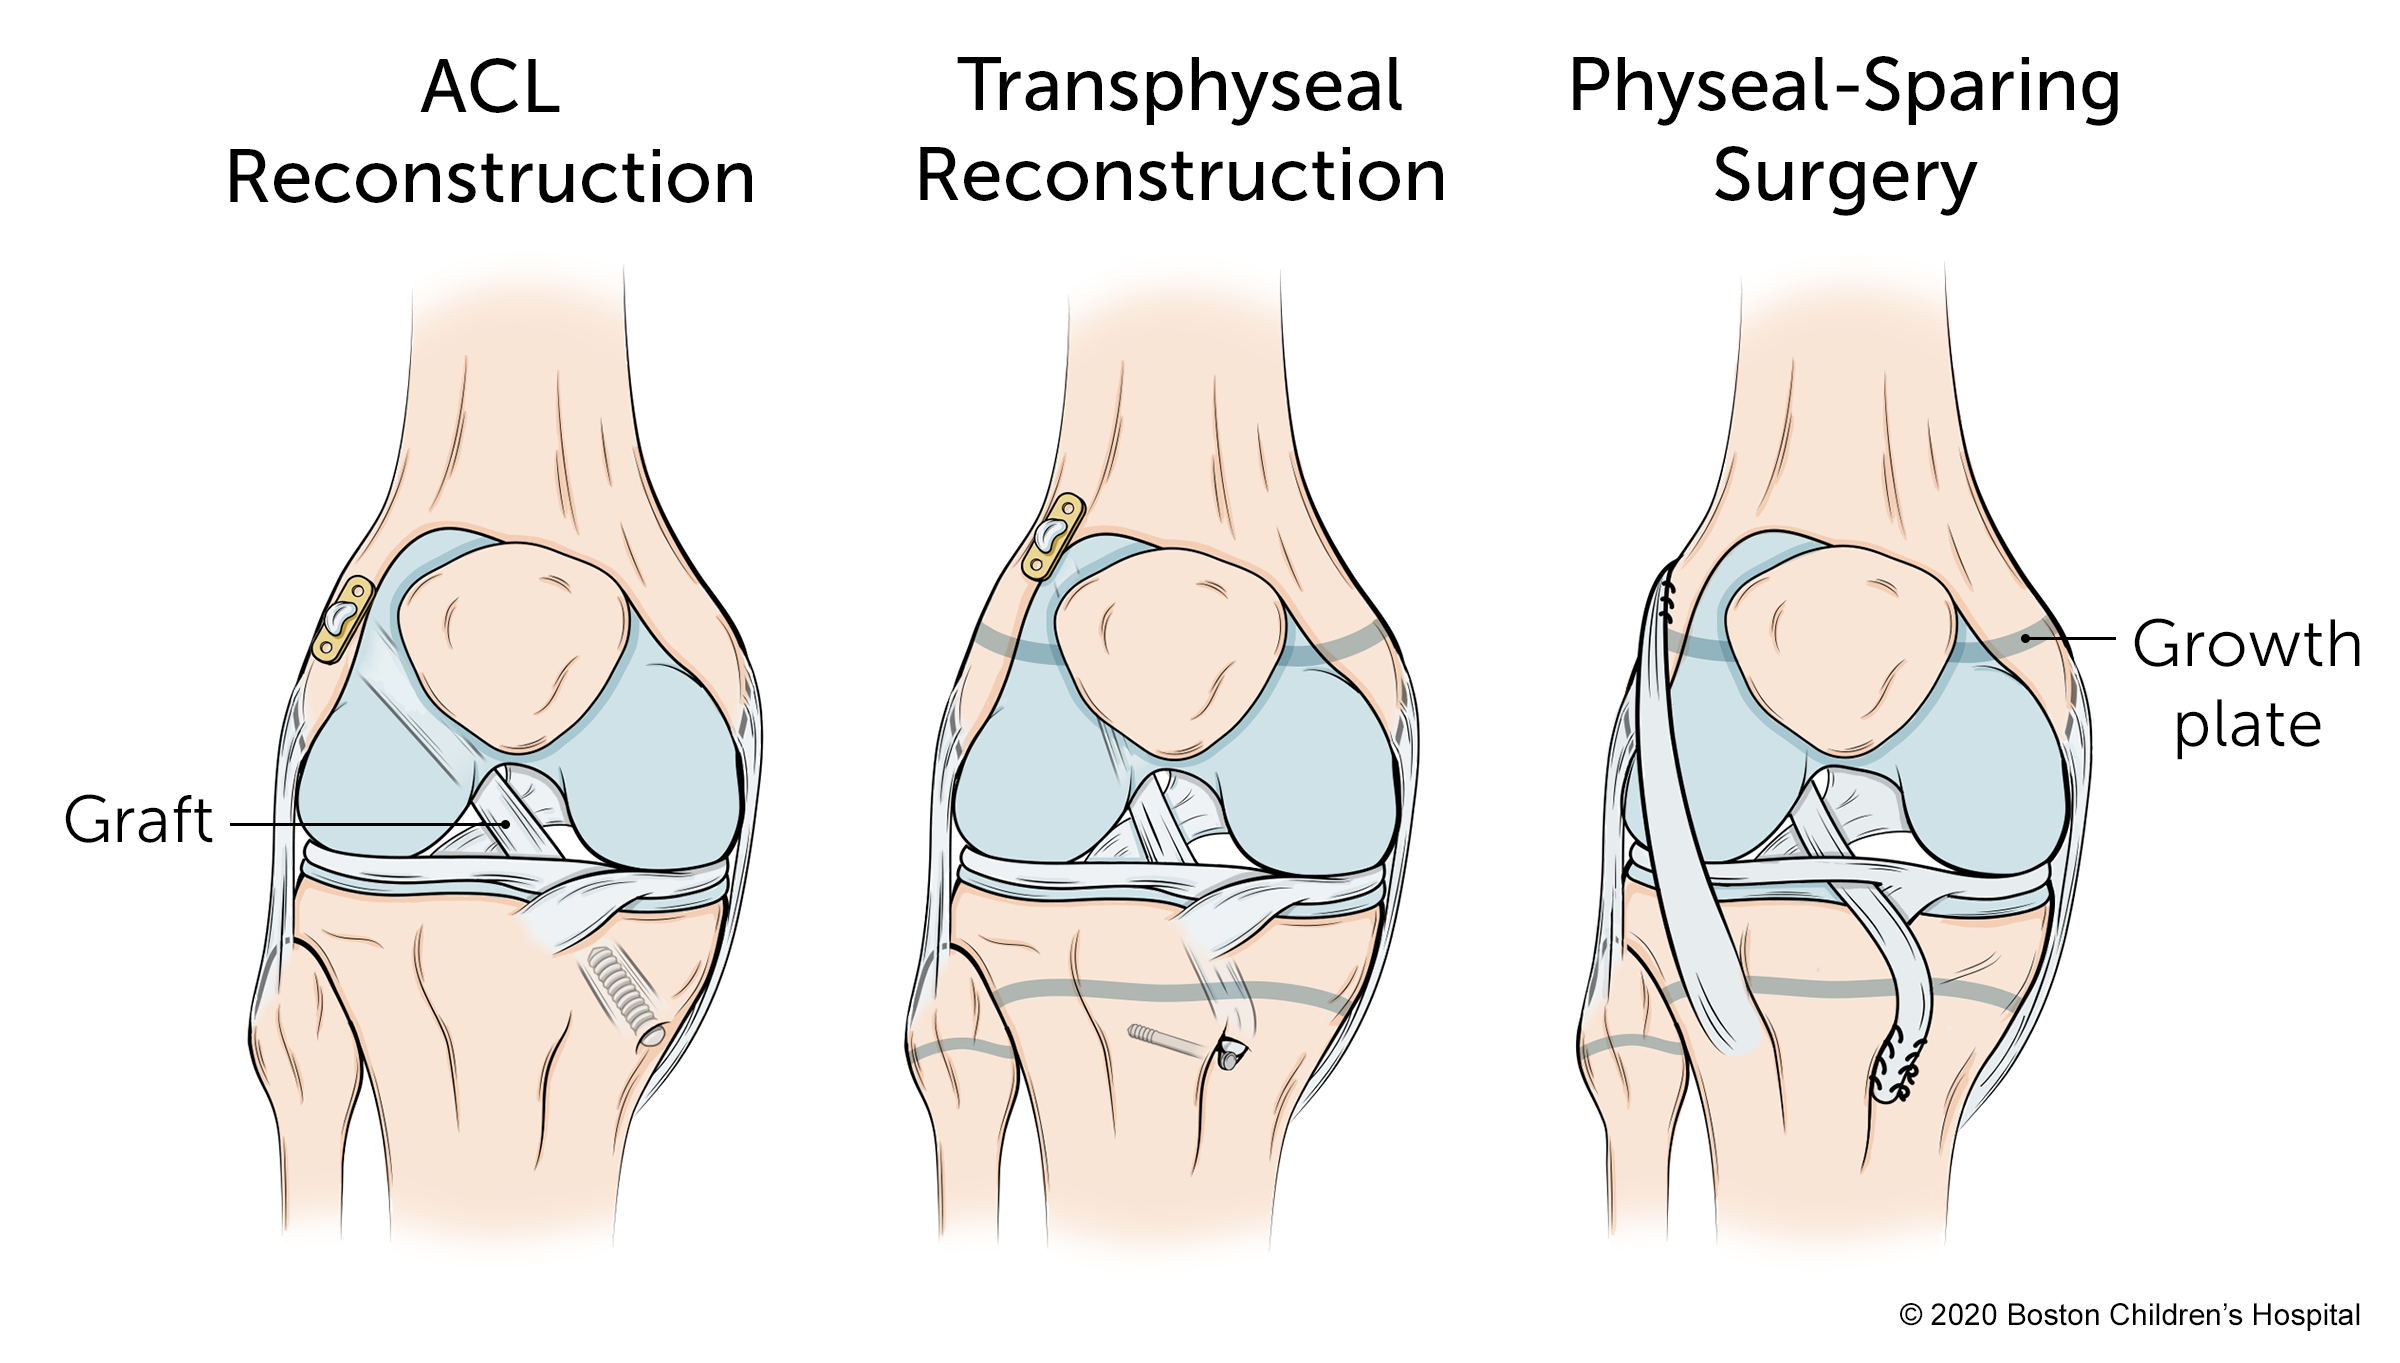 There are three types of surgery available: ACL reconstruction, transphyseal reconstruction, and physeal-sparing surgery.